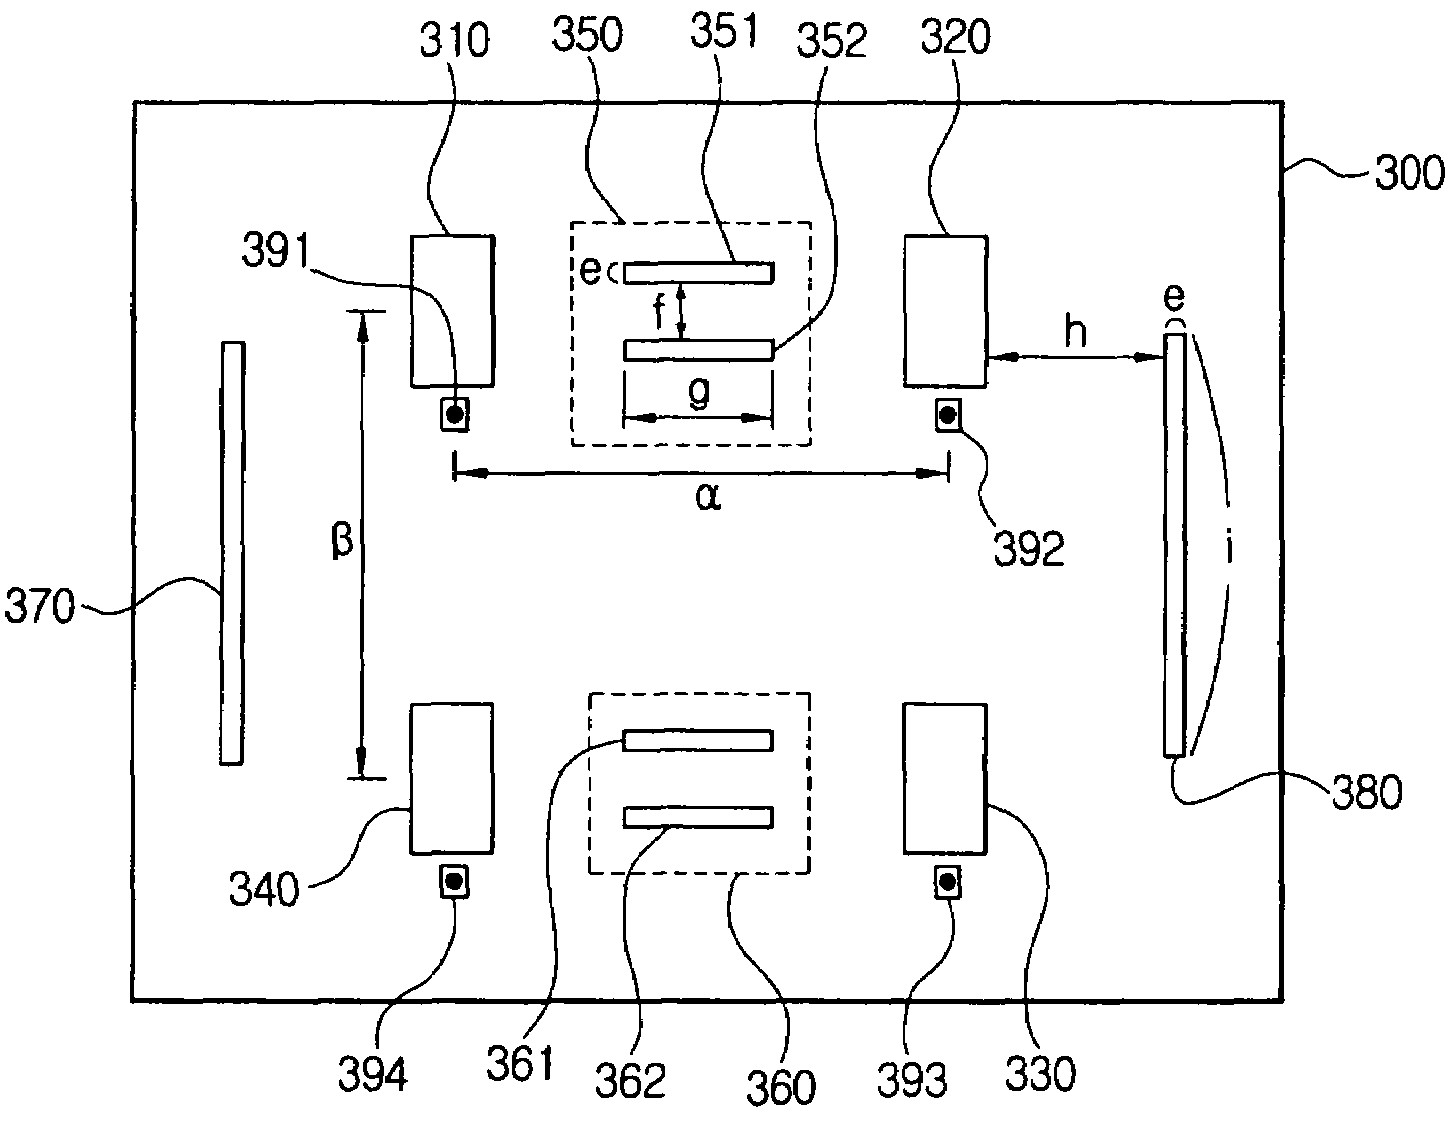 Plate board type MIMO array antenna including isolation element